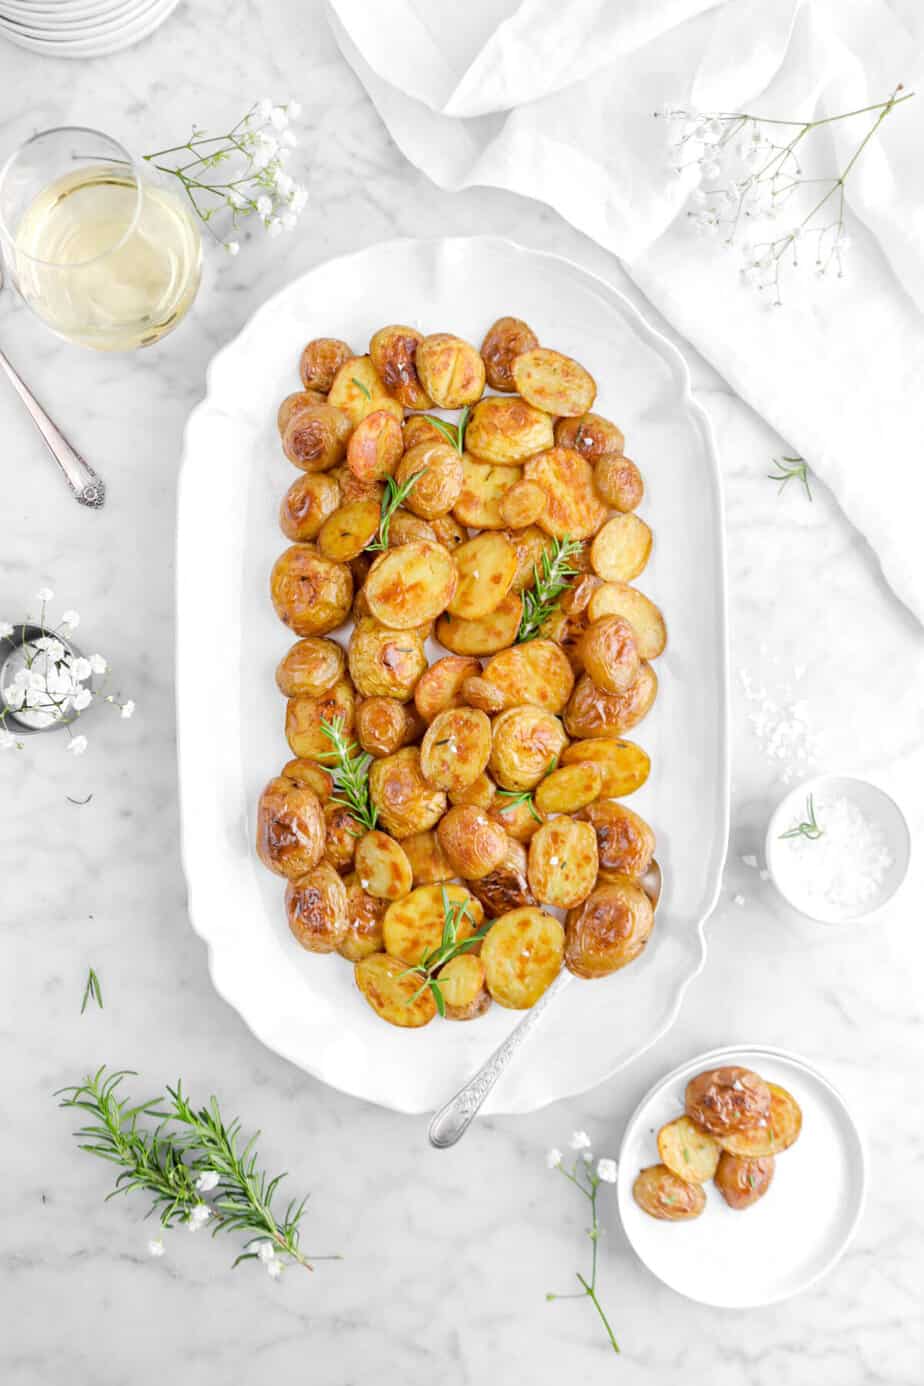 Roasted potatoes on white platter with spoon and fresh rosemary sprigs.